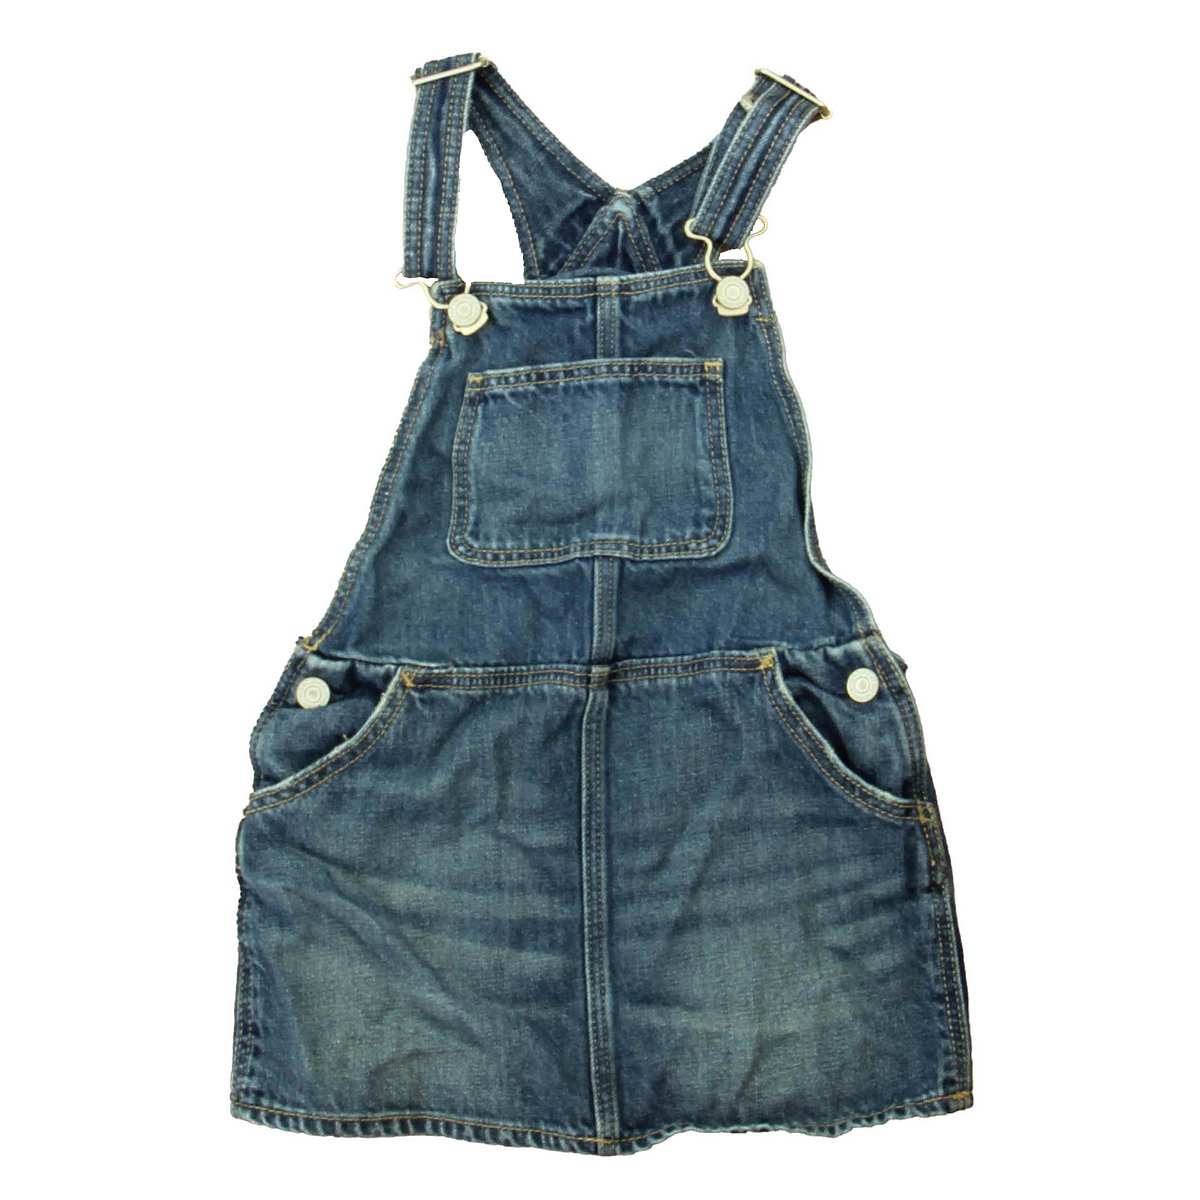 Overalls size: 3T